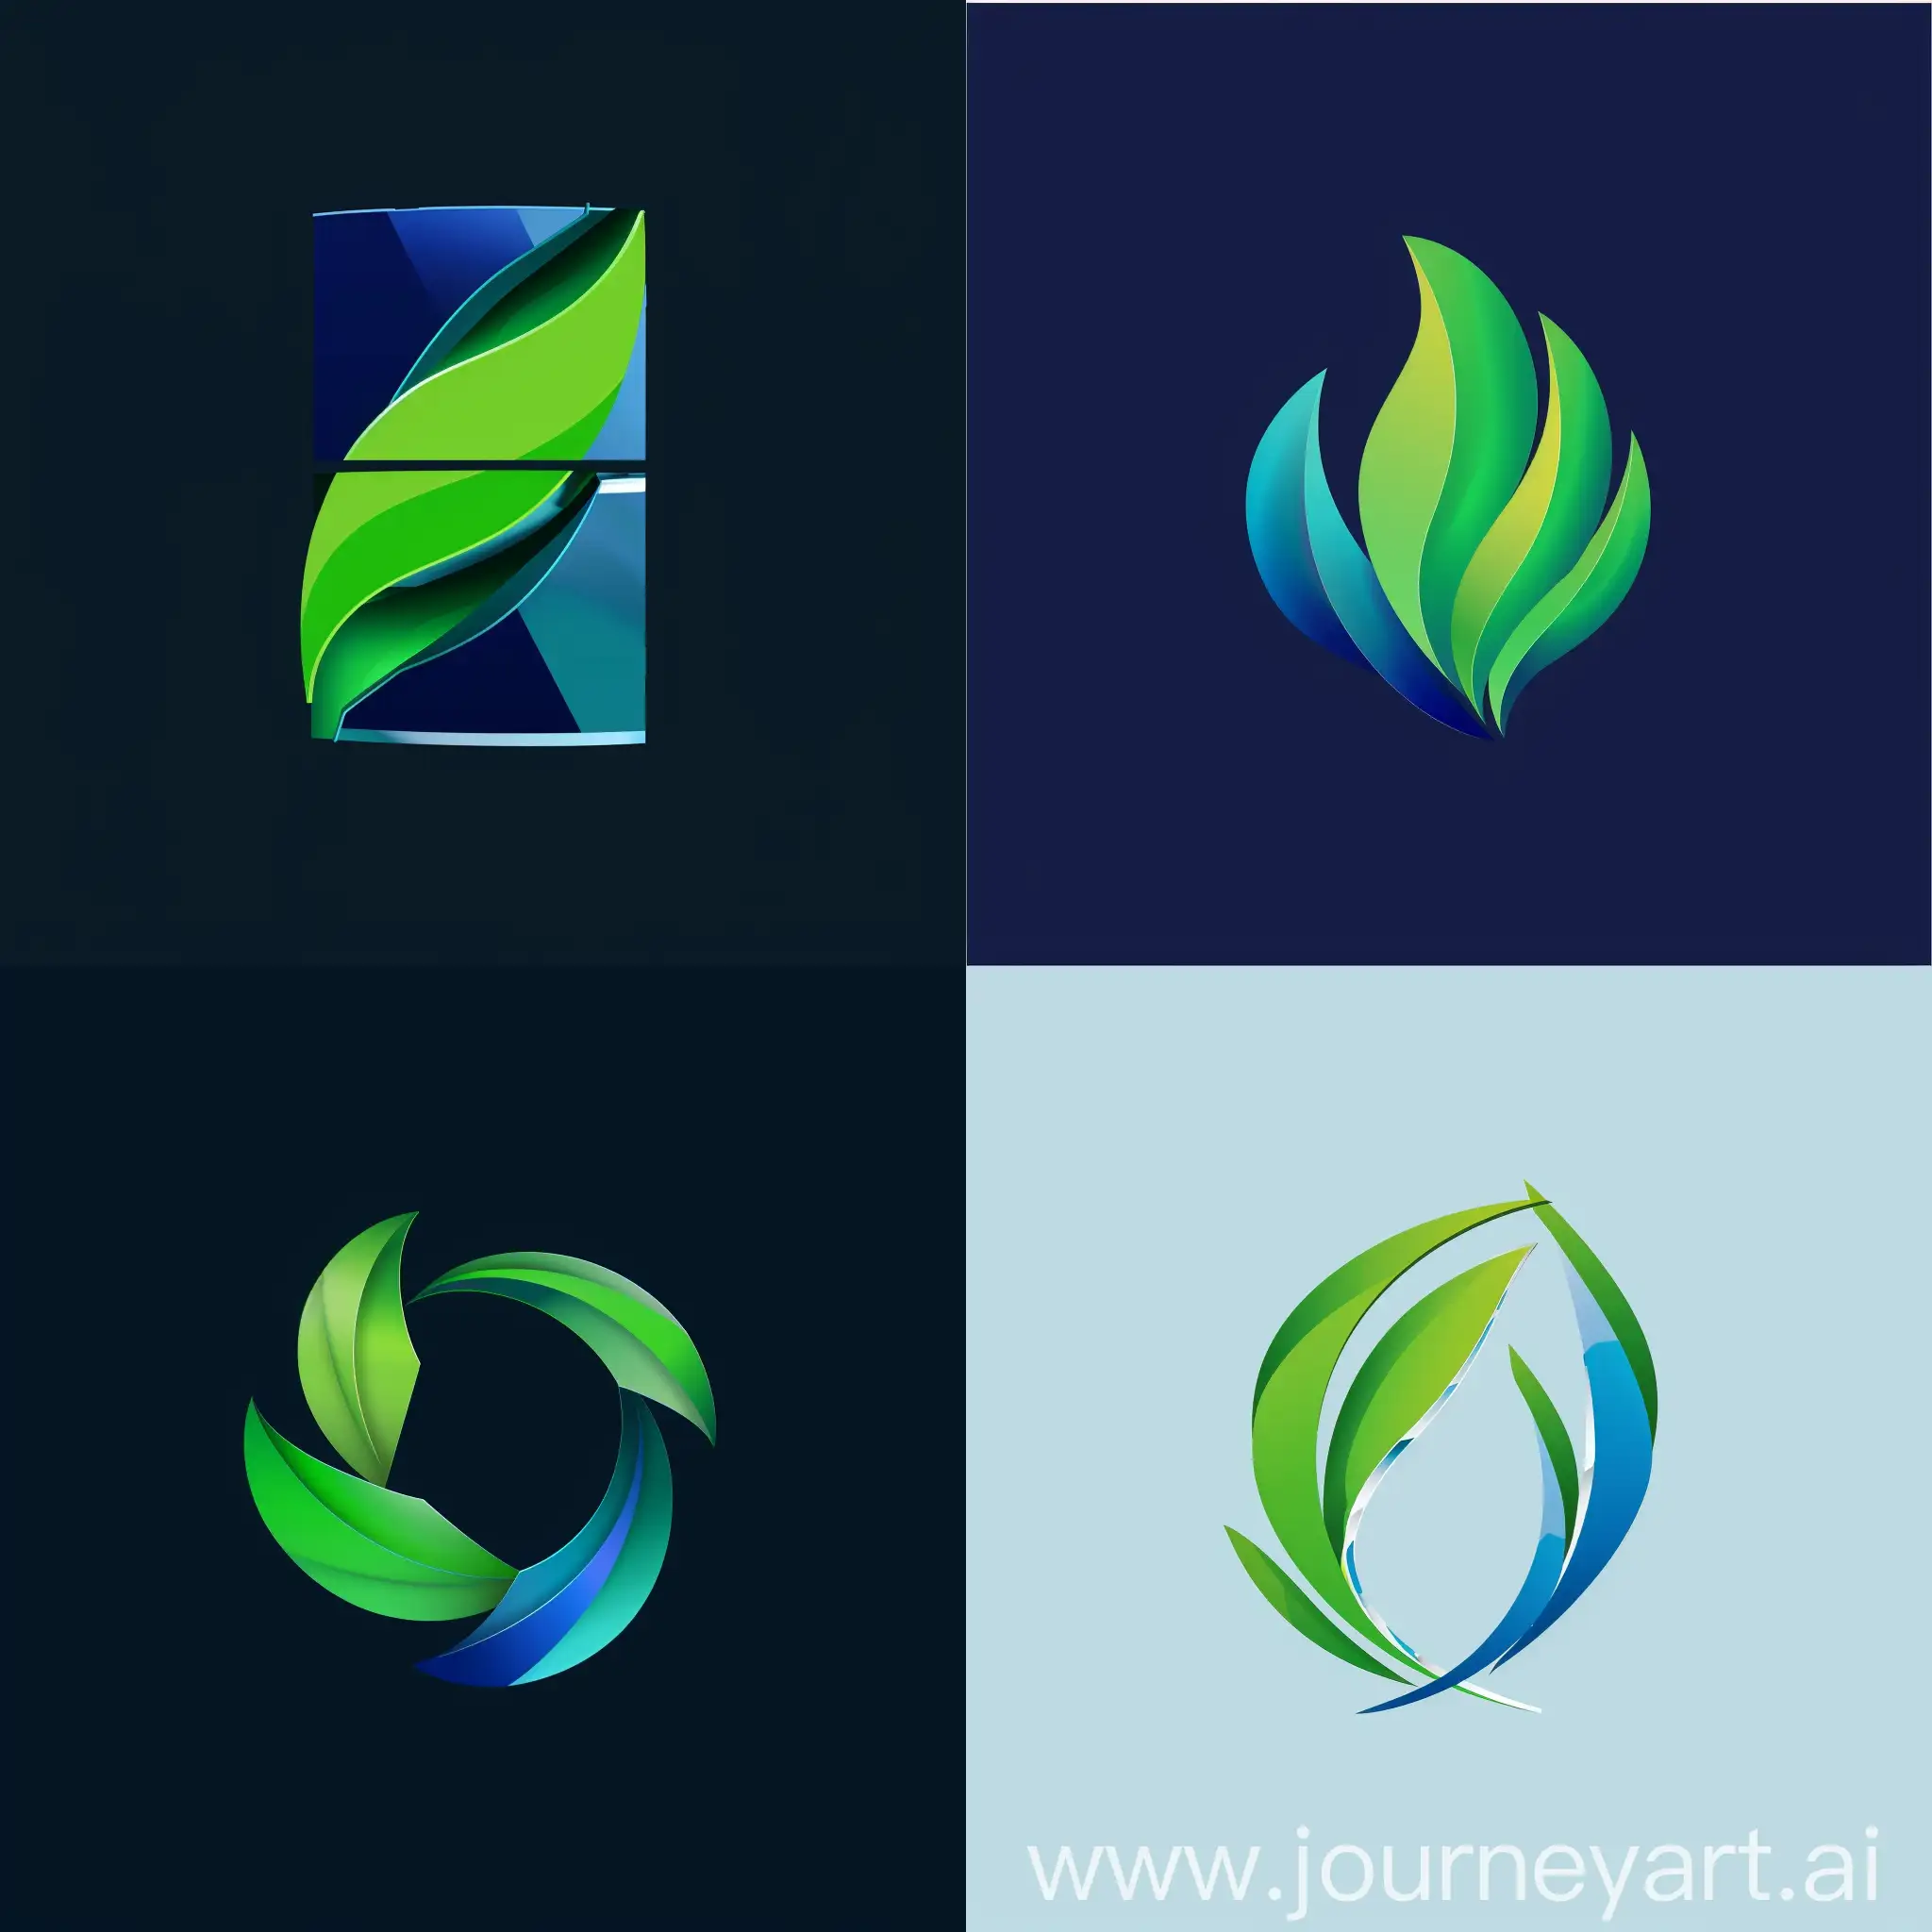 business logos for appliance company second life with green and blue colors